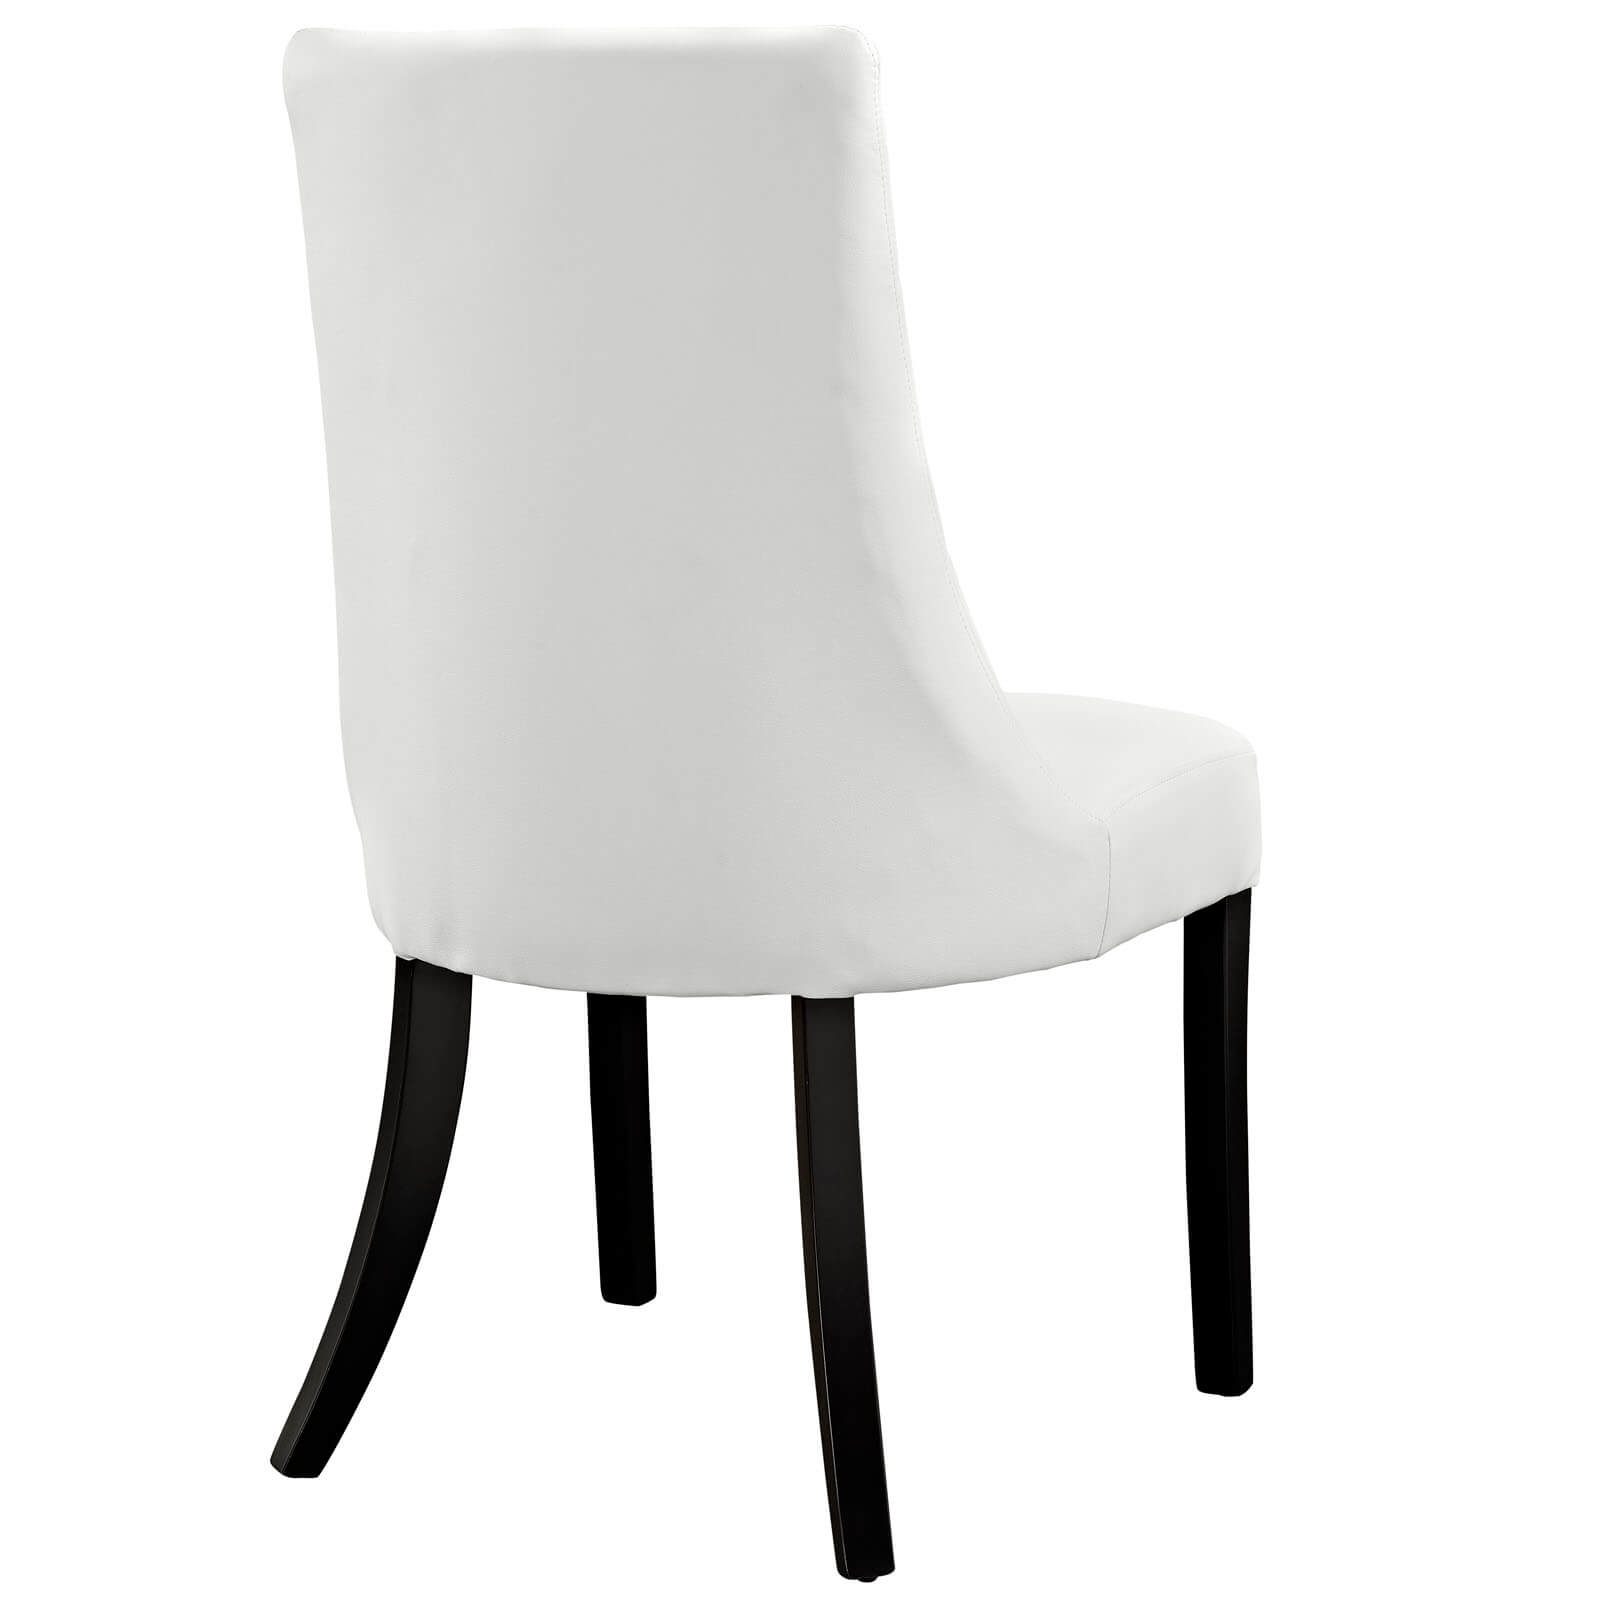 Upholstered dining chair back view